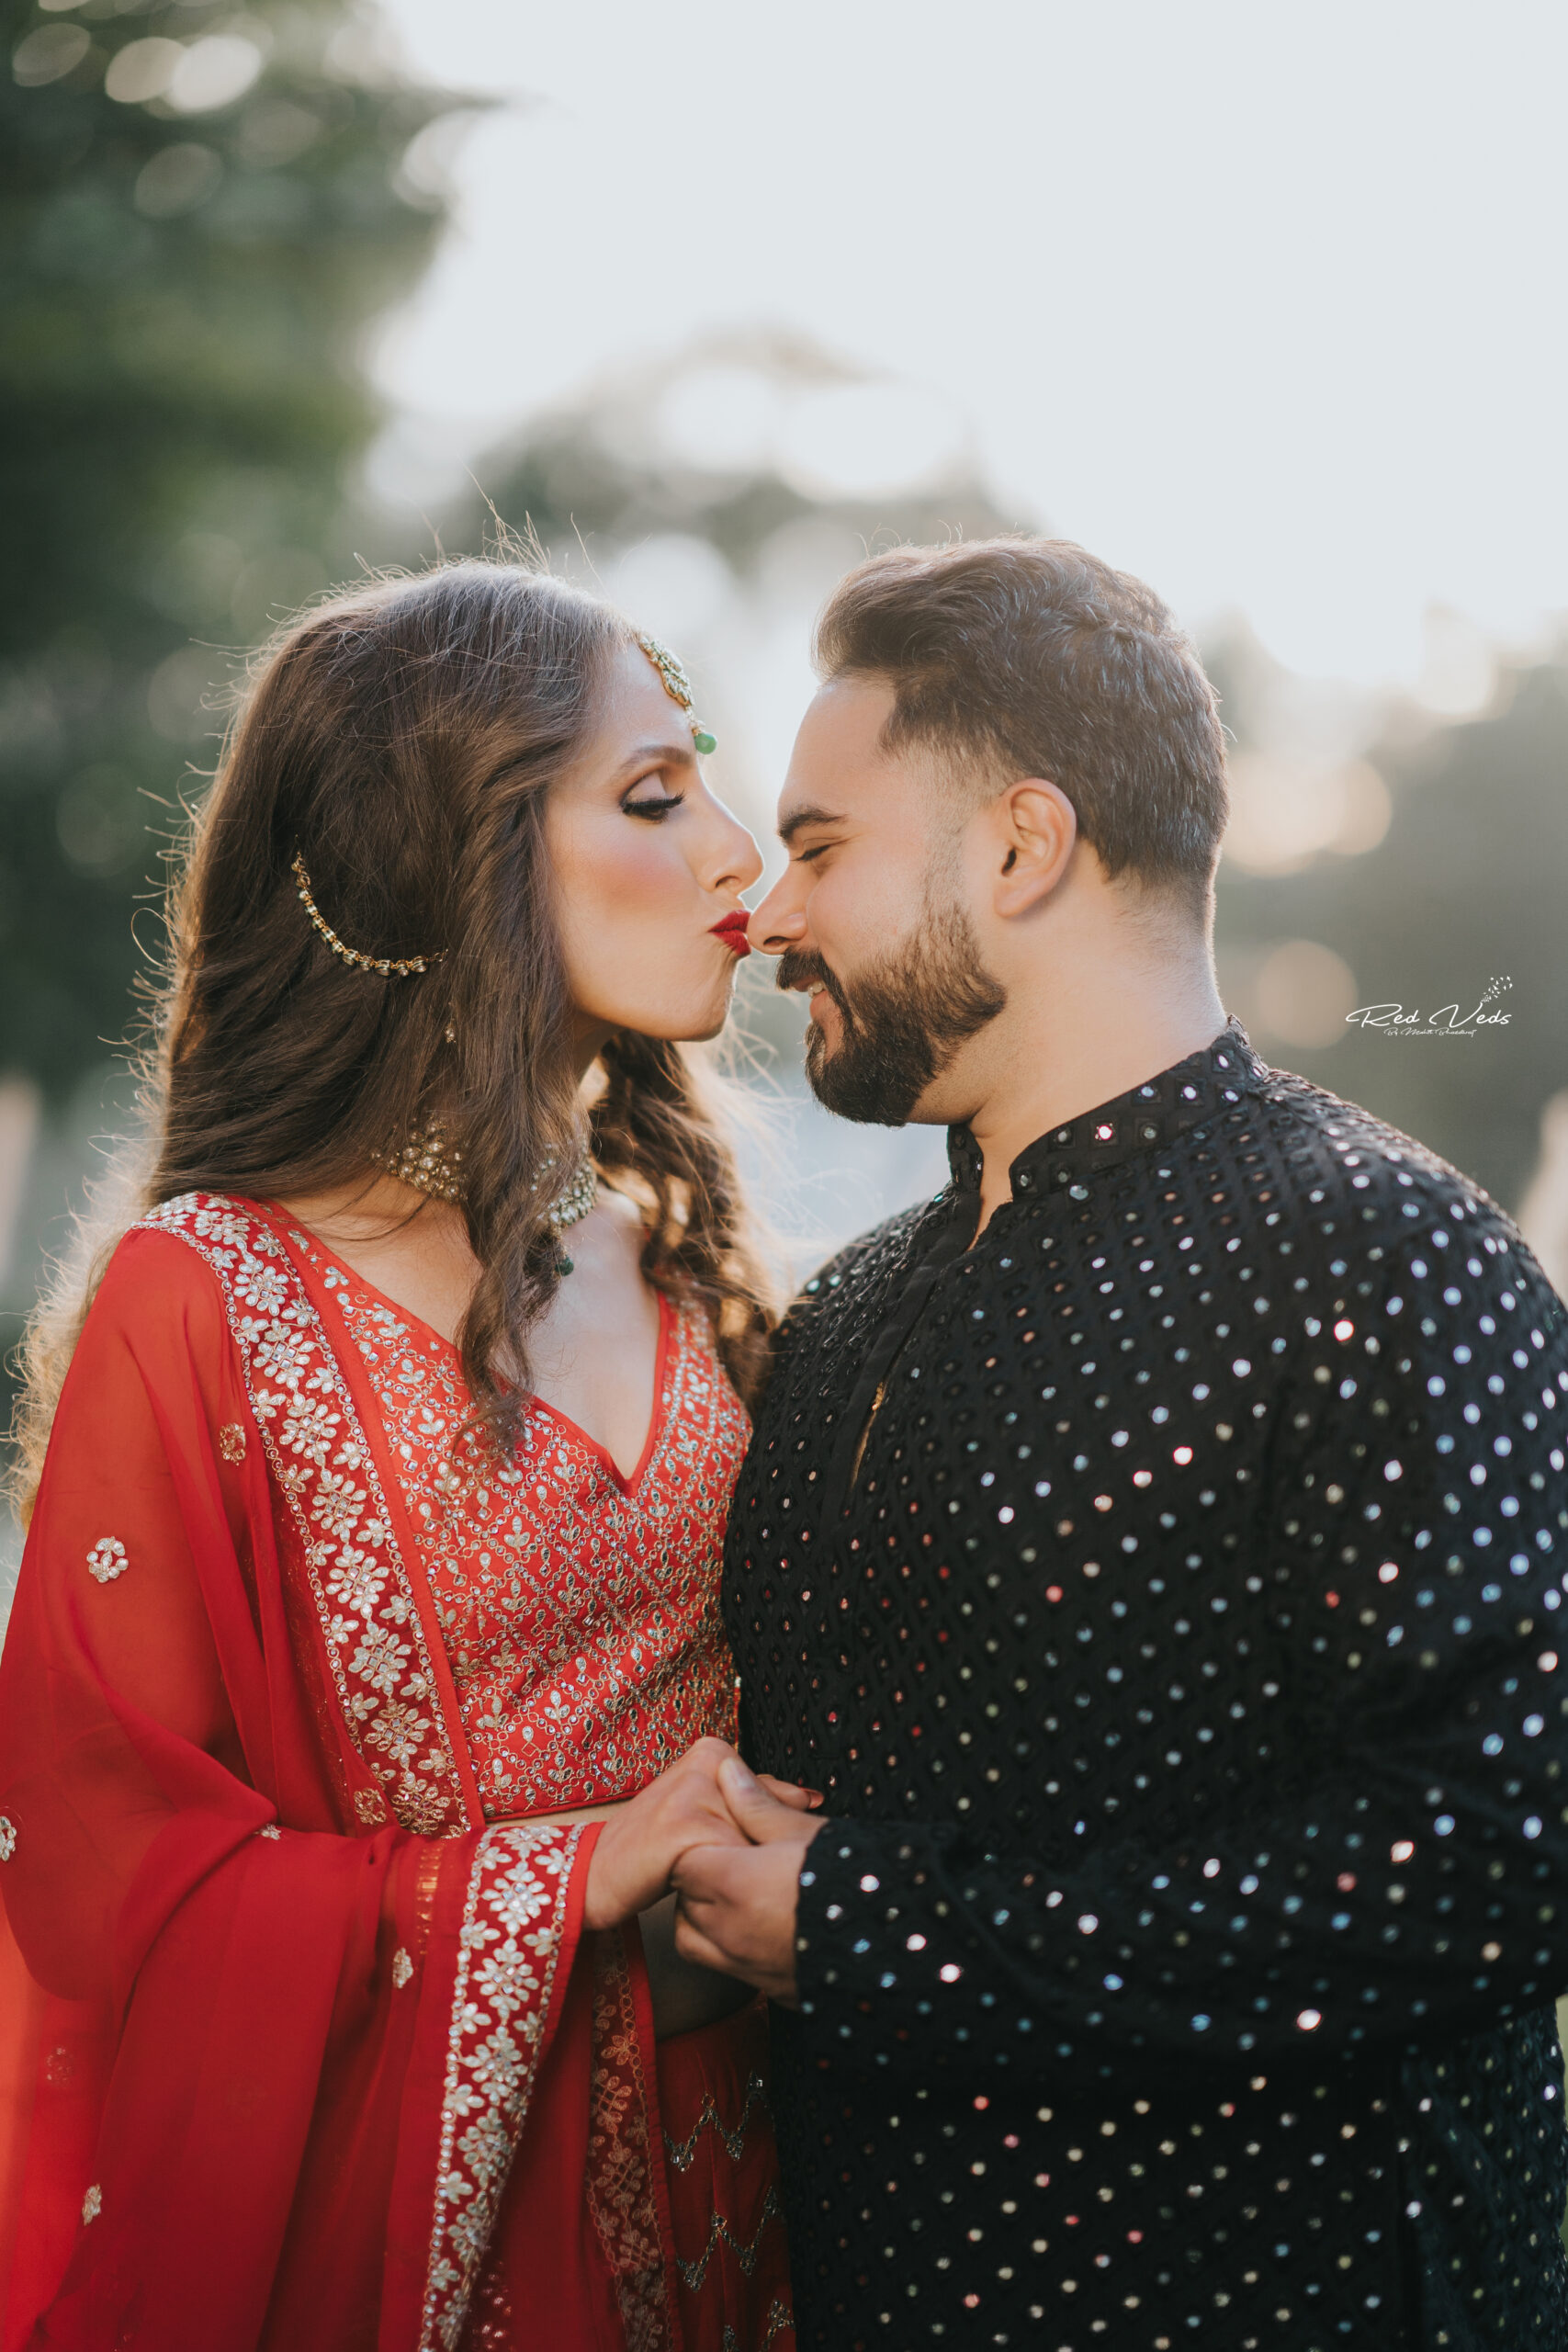 Check Out These Exotic Pre-wedding Shoot Ideas - Bold Outline : India's  leading Online Lifestyle, Fashion & Travel Magazine.